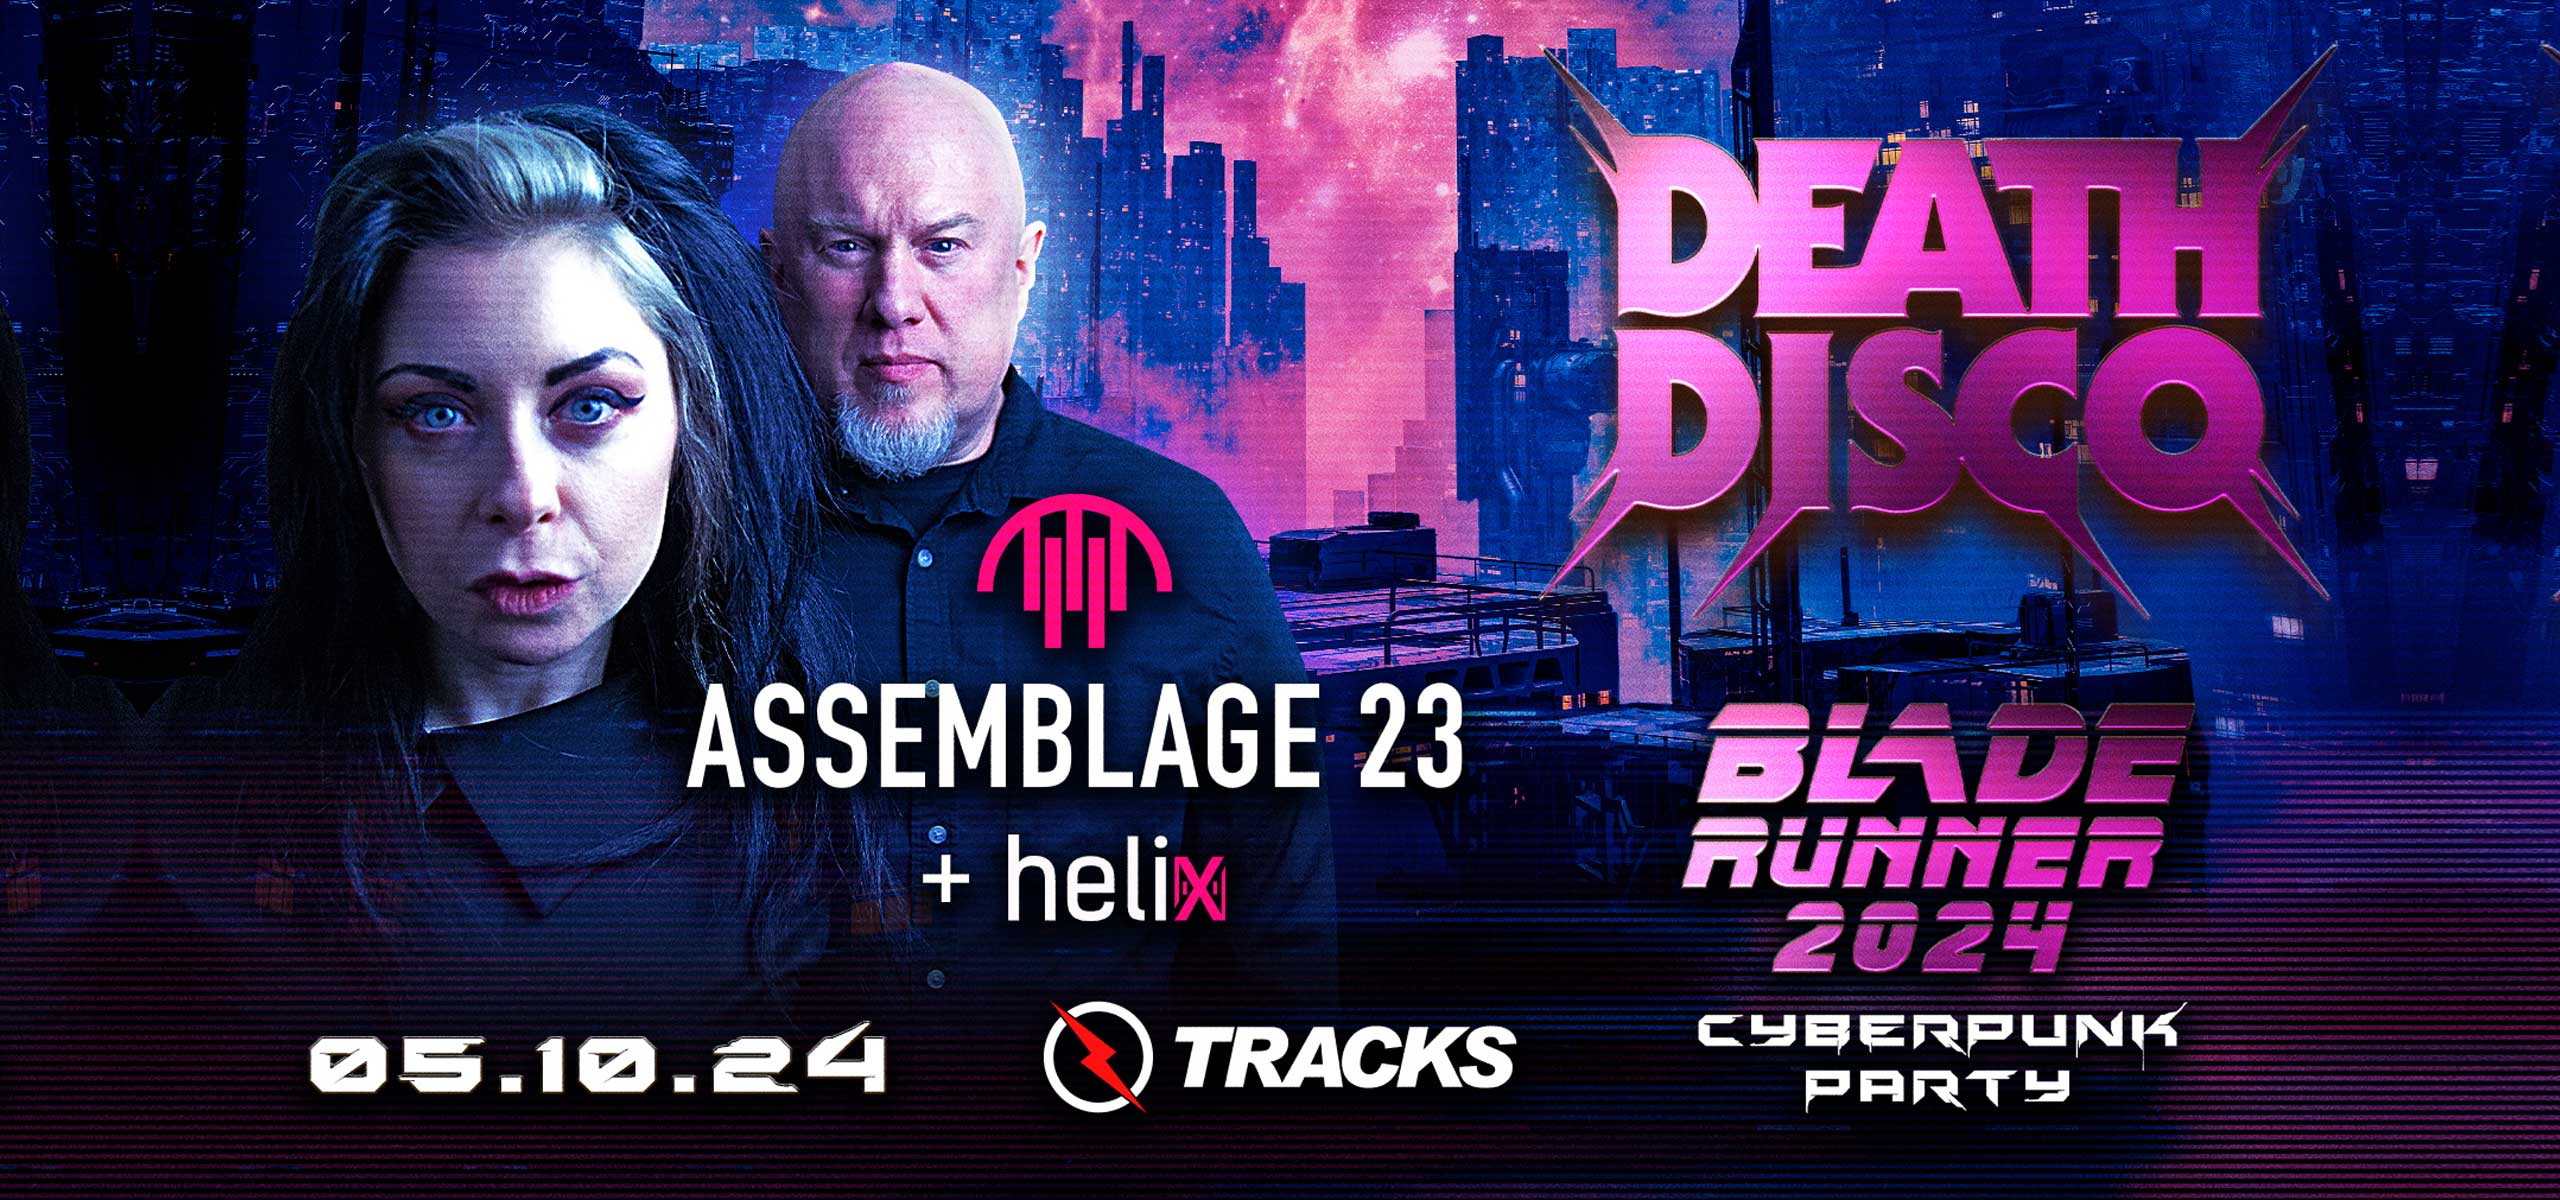 DEATH DISCO – Bladerunner 2024 – A Cyberpunk Party w/ Assemblage 23 + Helix Live